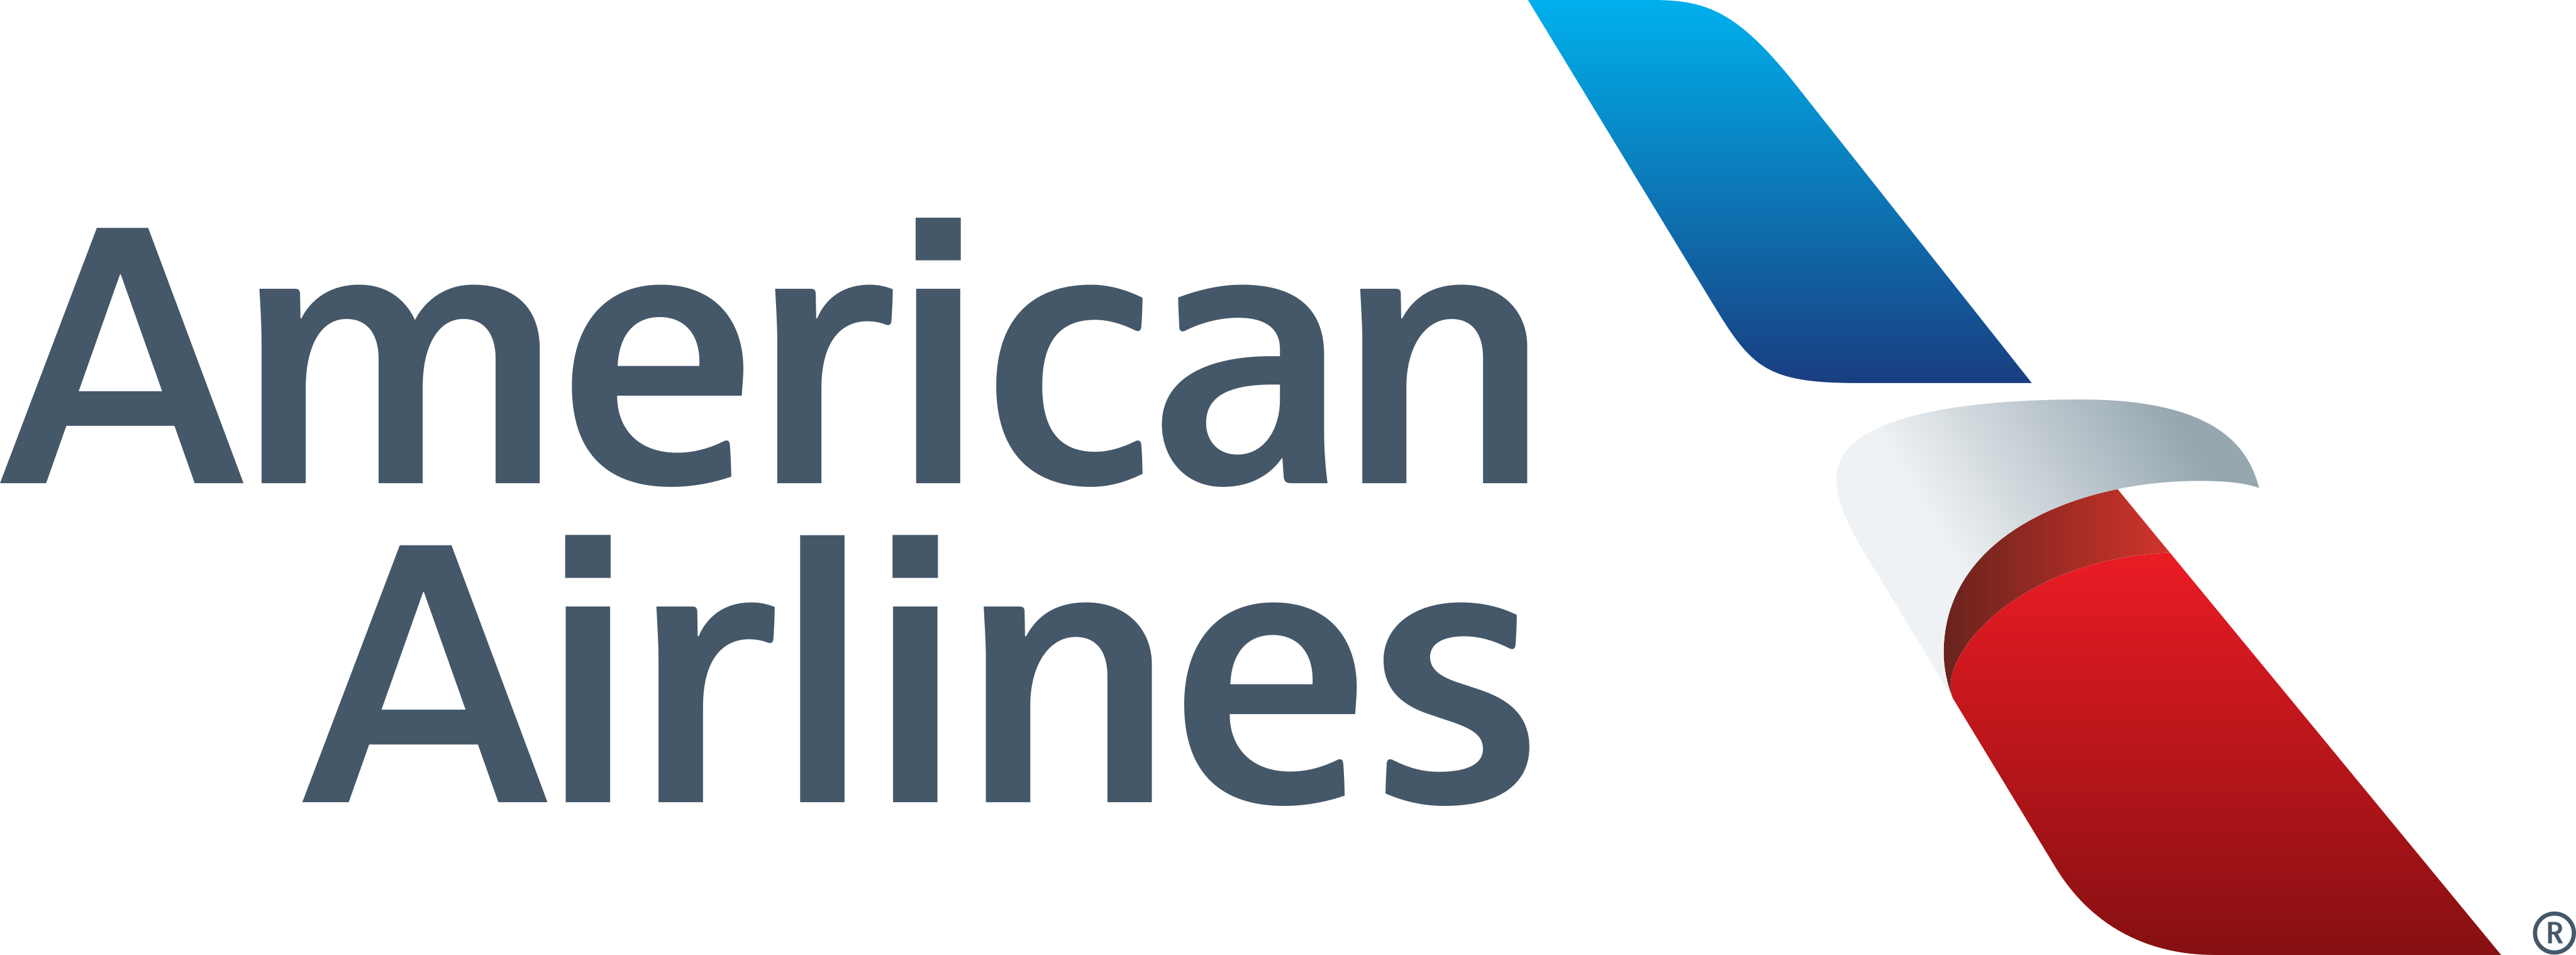 american-airlines-logo-1